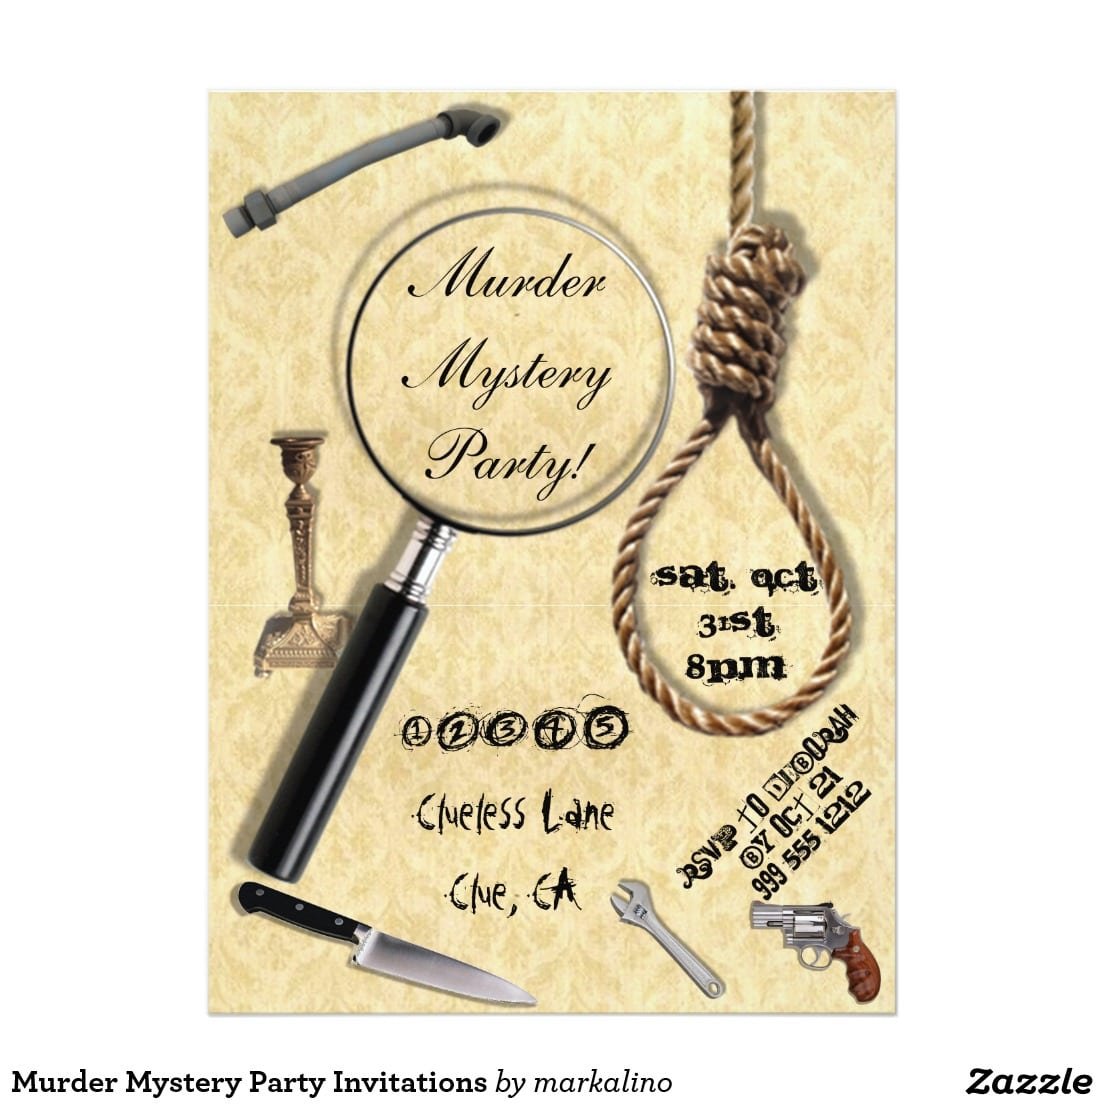 Murder Mystery Party Invitations